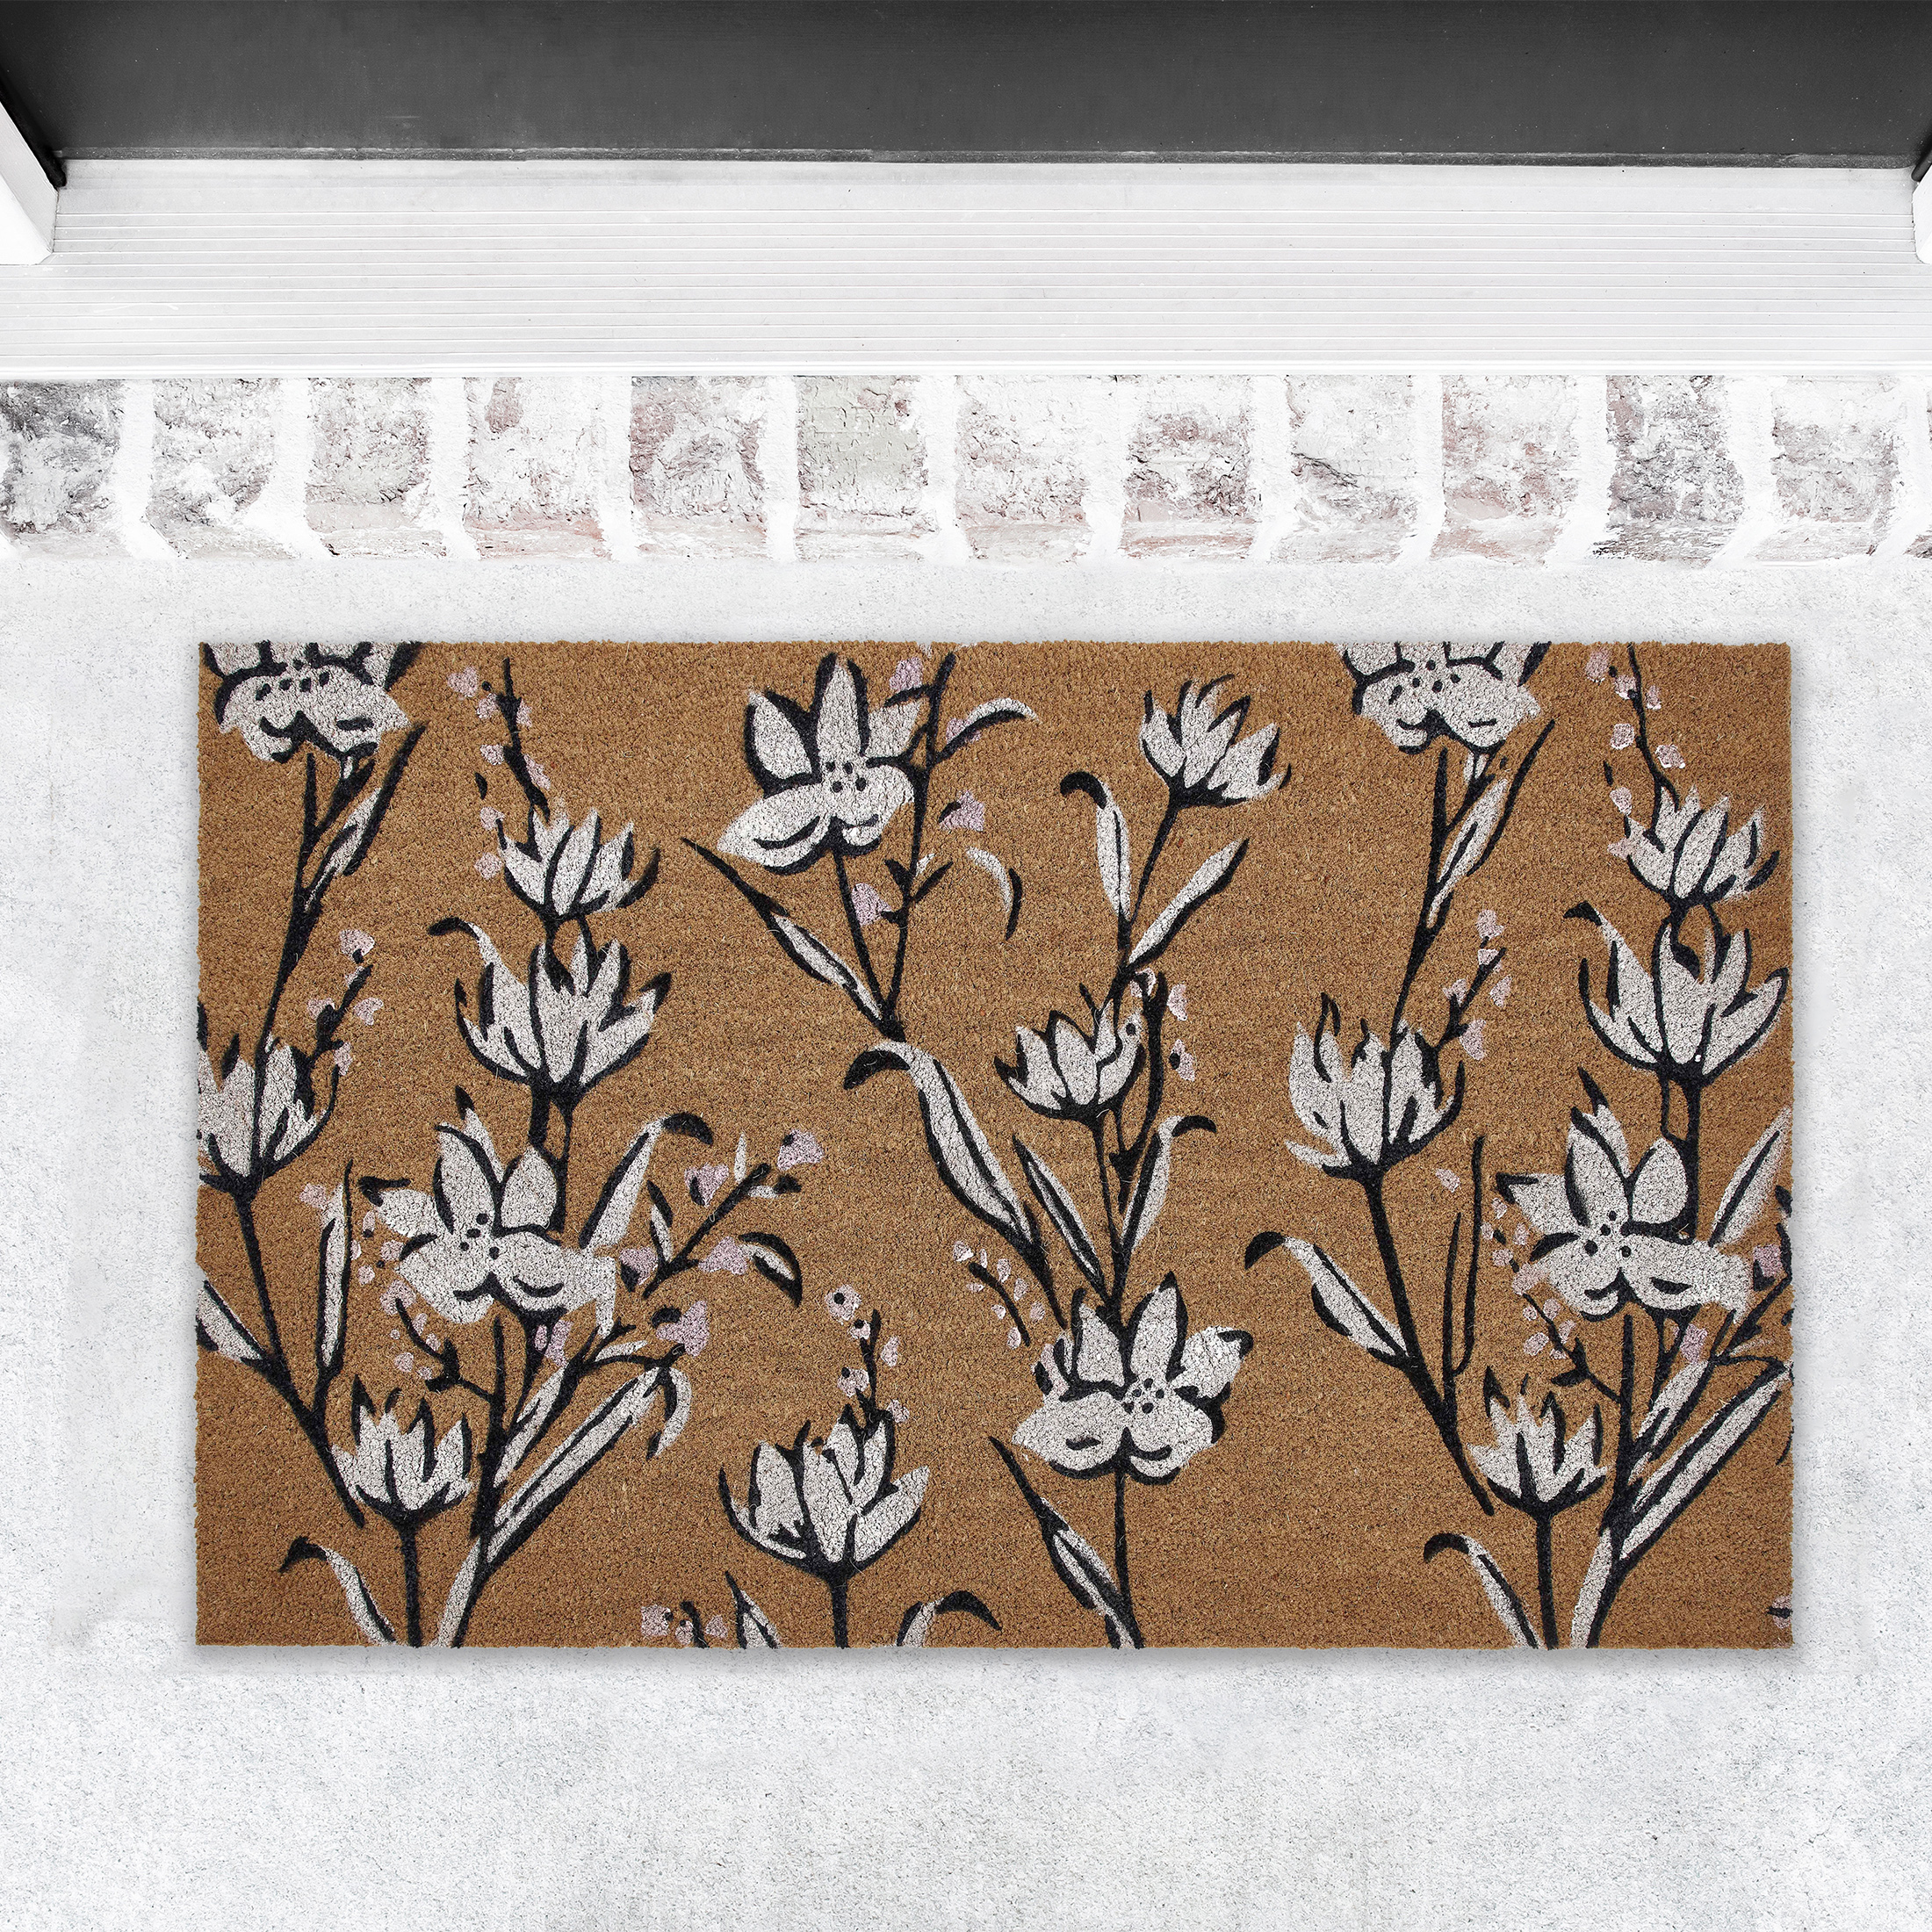 My Texas House Vertical Floral Natural/White Outdoor Coir Doormat, 18" x 30" - image 2 of 5